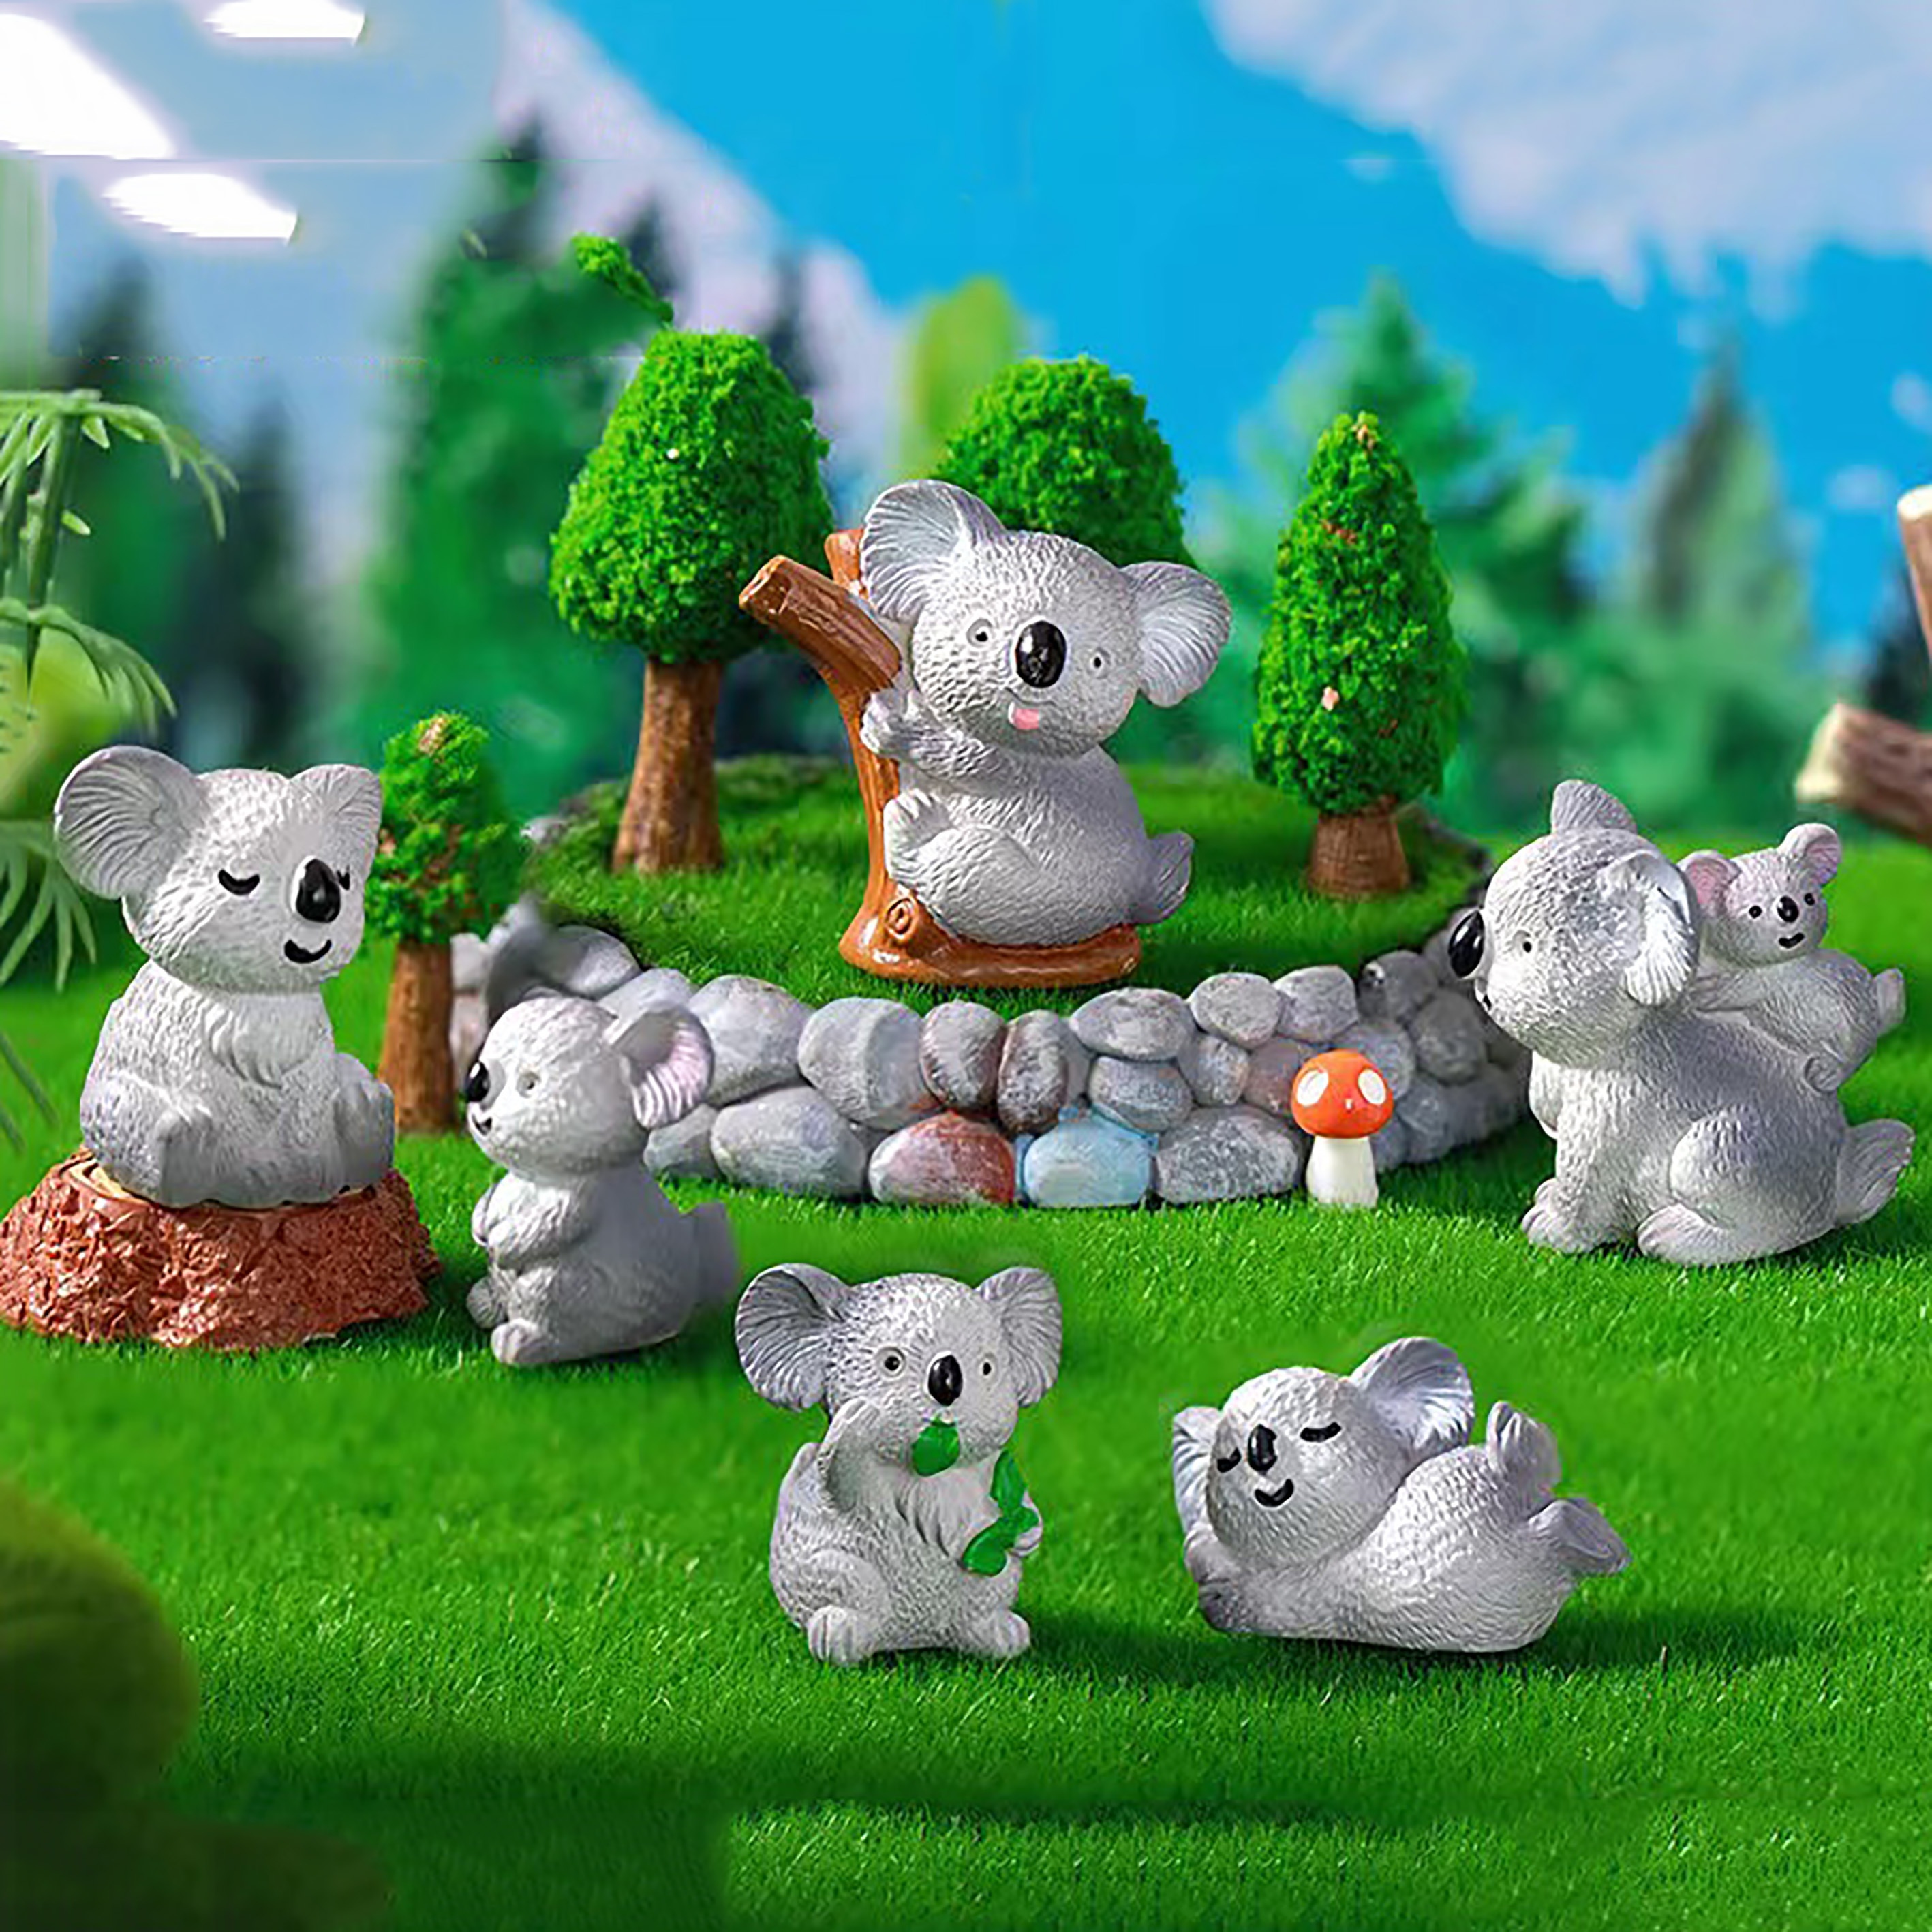 Simulated Koala Ornaments For Kyodan Outdoor Micro Landscaping And